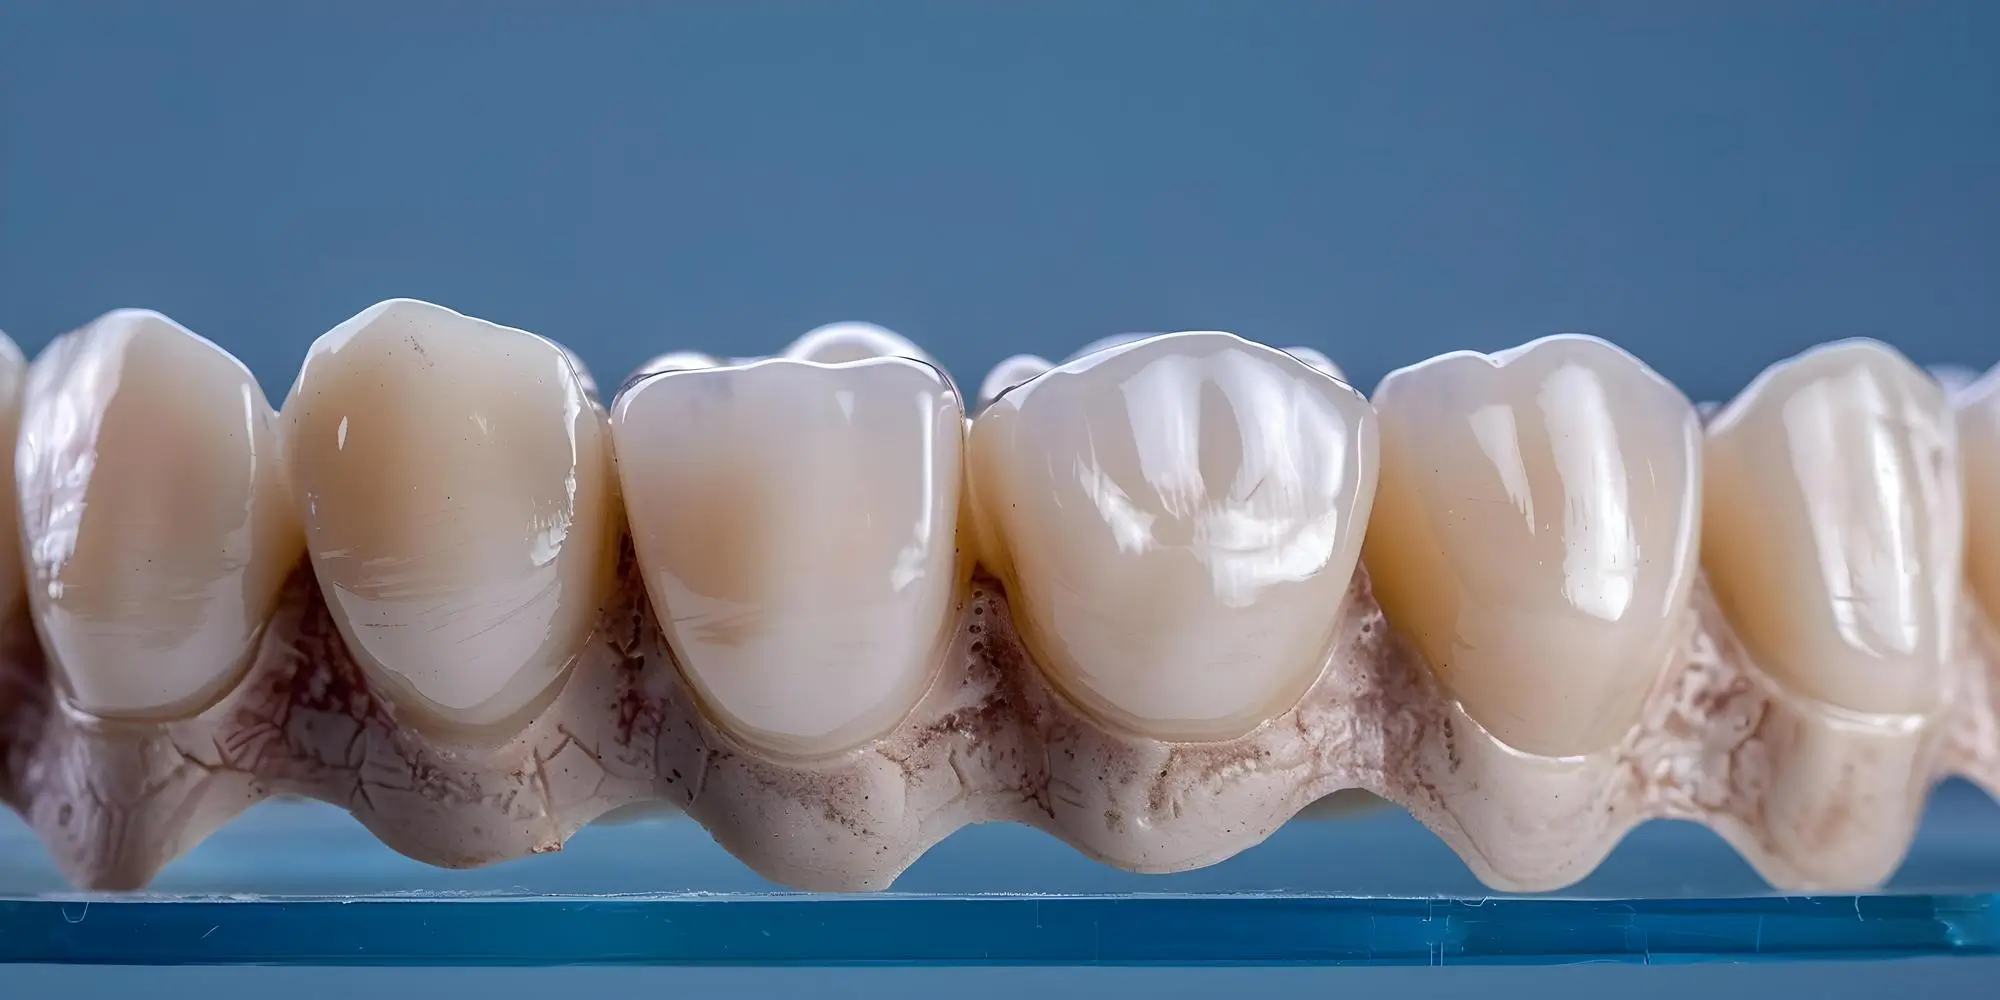 Dental Material Comparison in Holistic Dentistry